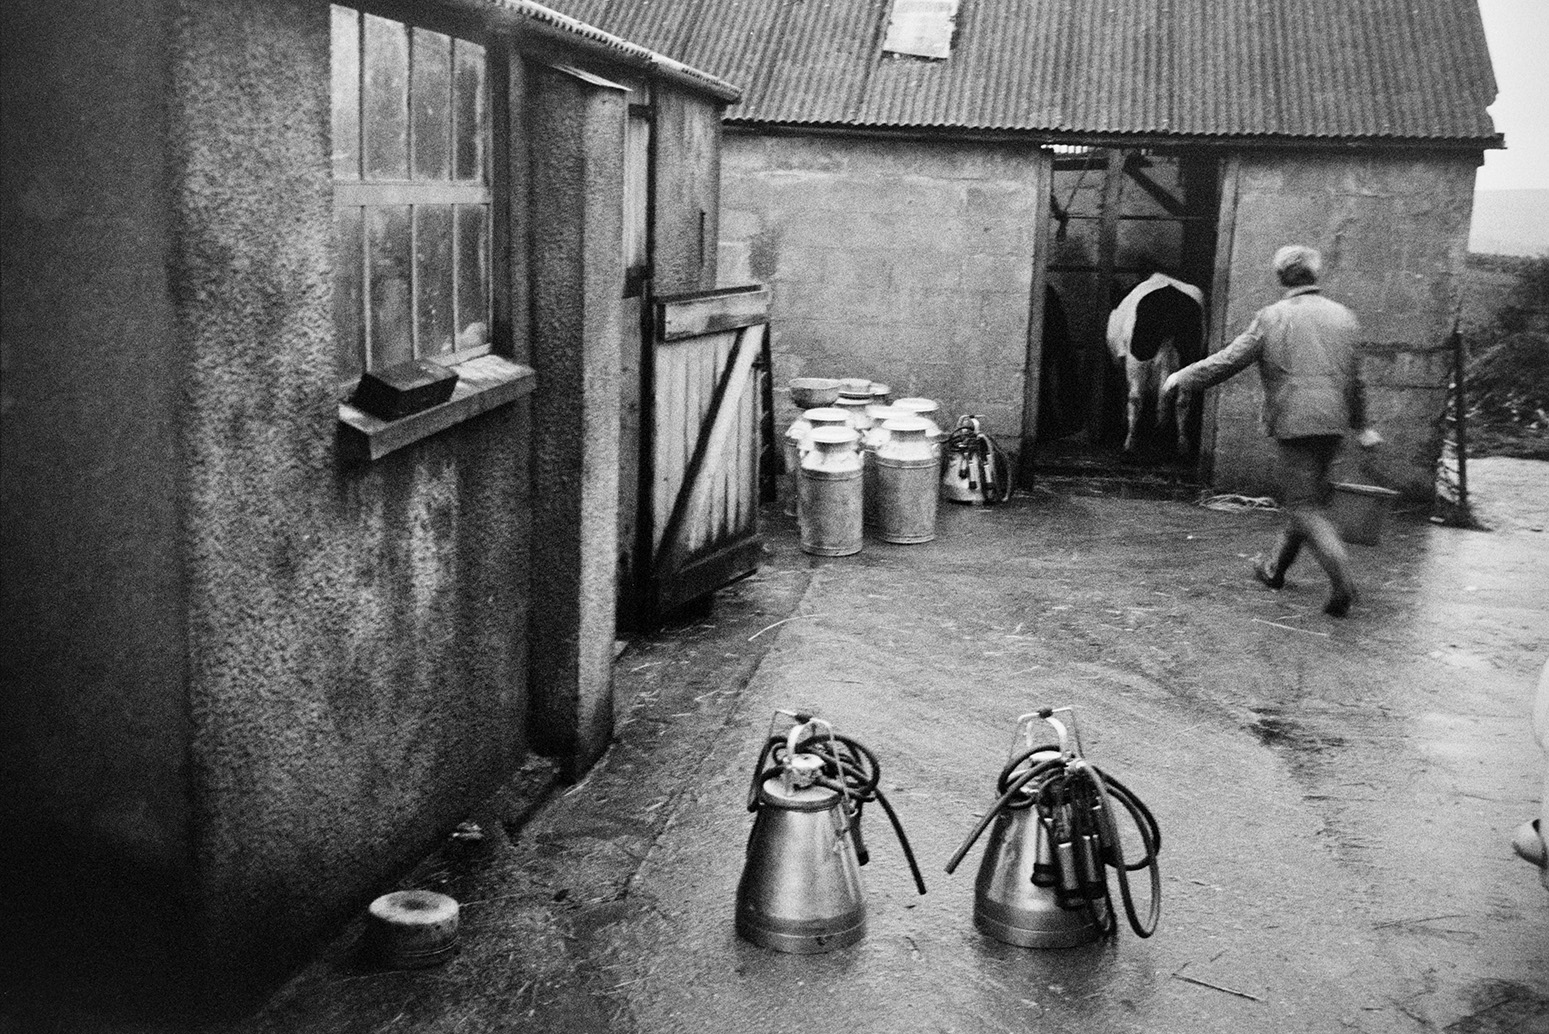 Ivor Bourne herding a cows into a milking parlour to be milked at Mill Road Farm, Beaford. He is also carrying a bucket. Milking machines and milk churns can be seen in the farmyard. The farm was also known as Jeffrys.